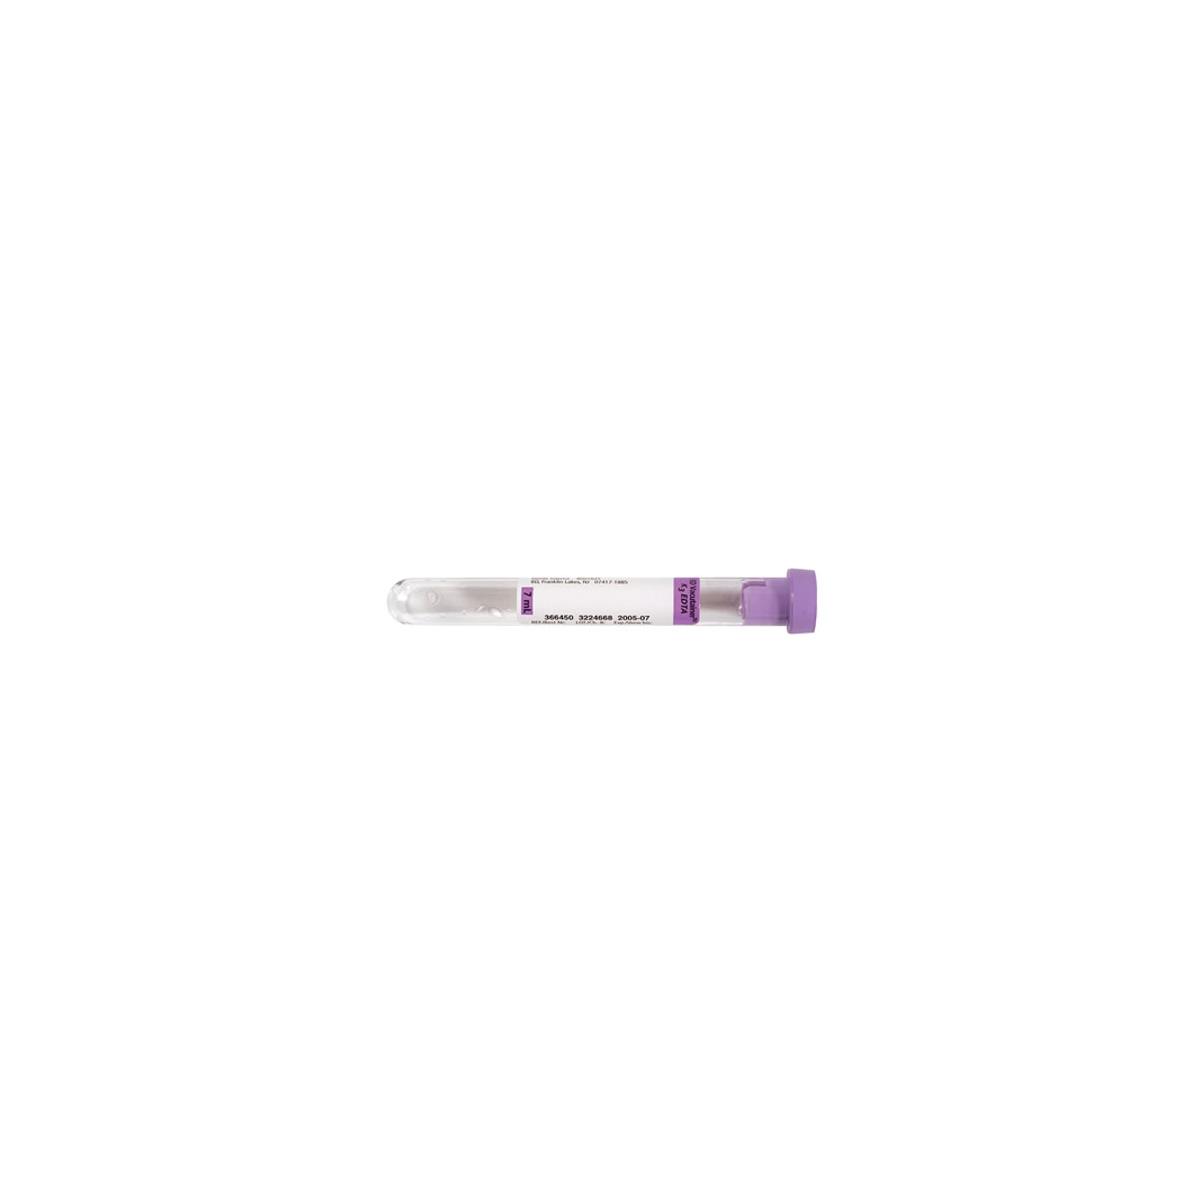 Image of Sirchie 7 ml Lavendar Stopper Blood Collection Tube